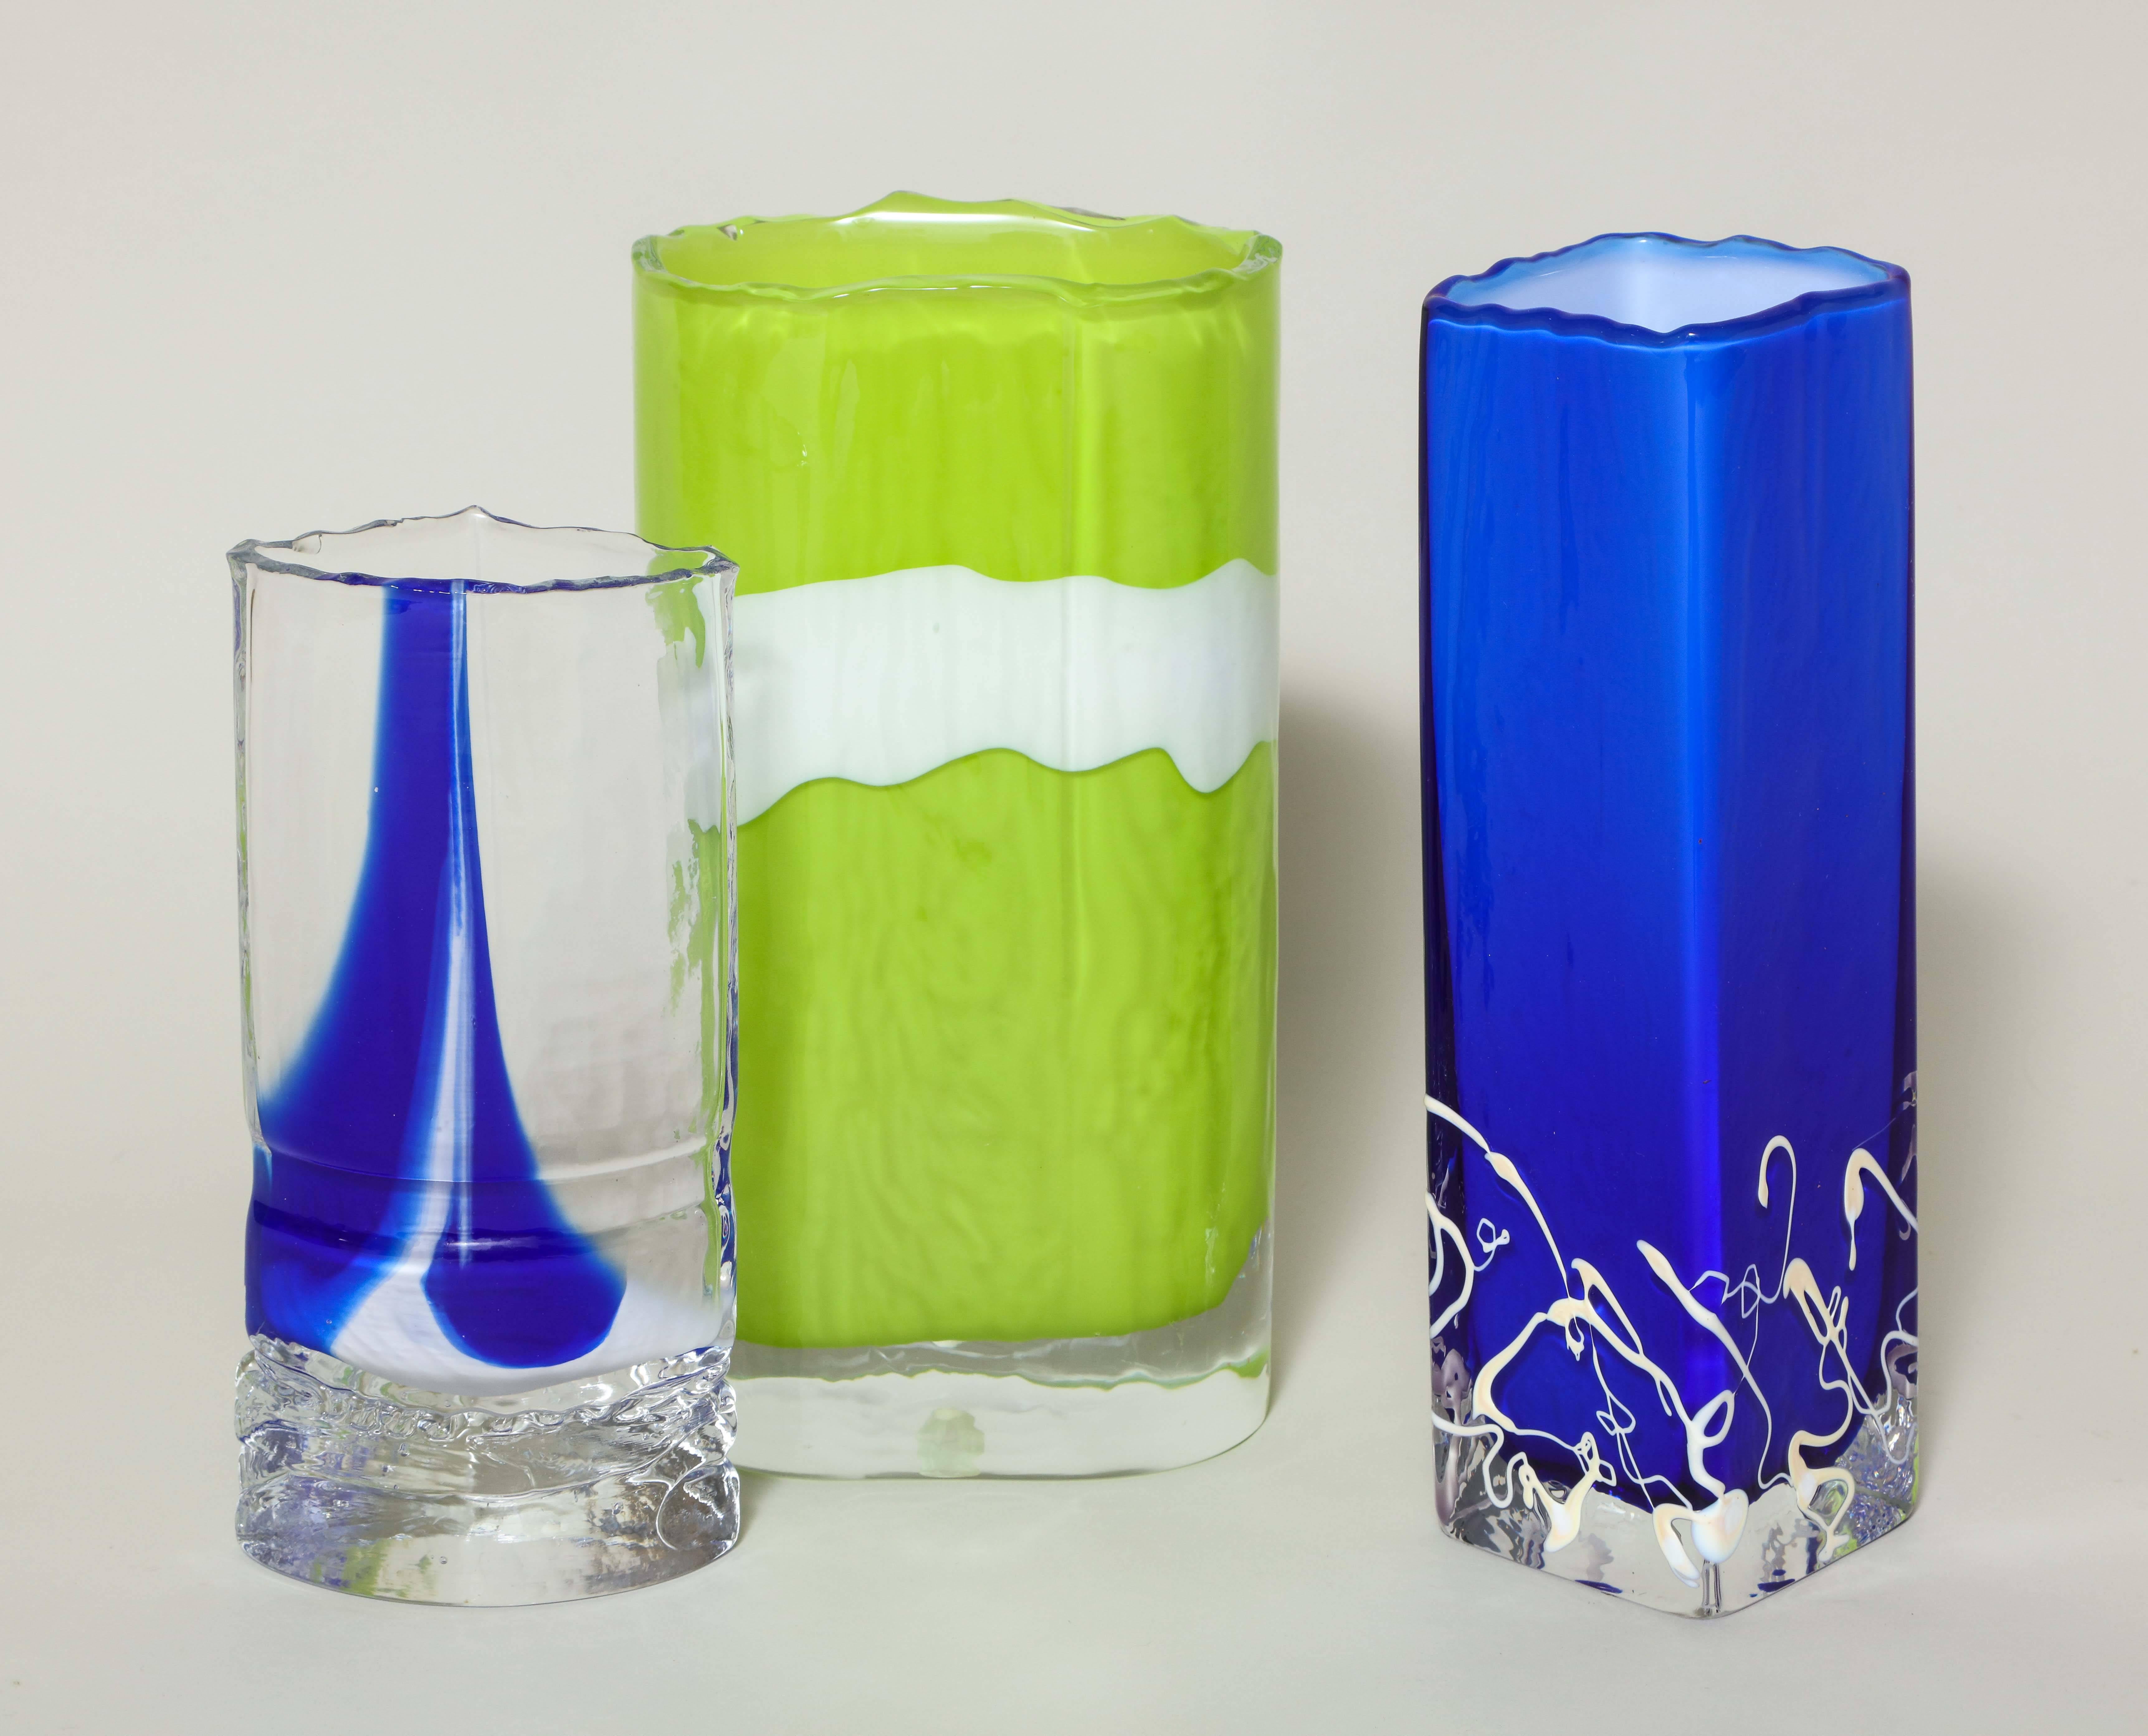 A collection of three vibrantly hued handmade sculptural glass vessels by Berànek with reticulated top edges and vibrant colors with white accents: lime green with white ribbon, blue with white drip lines and blue with white inclusion. Emanuel